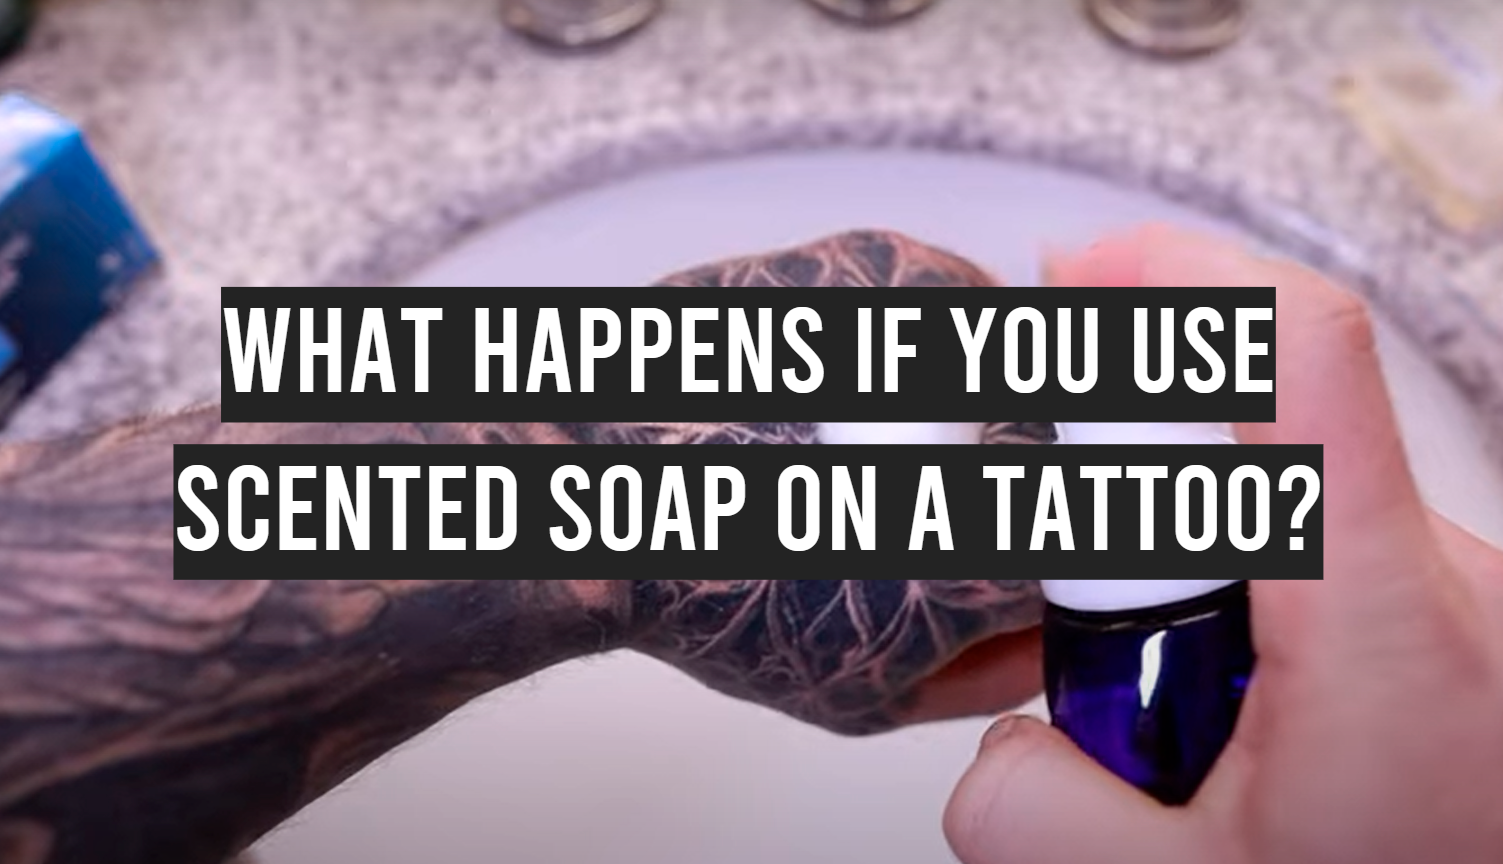 When can you use scented soap on a tattoo